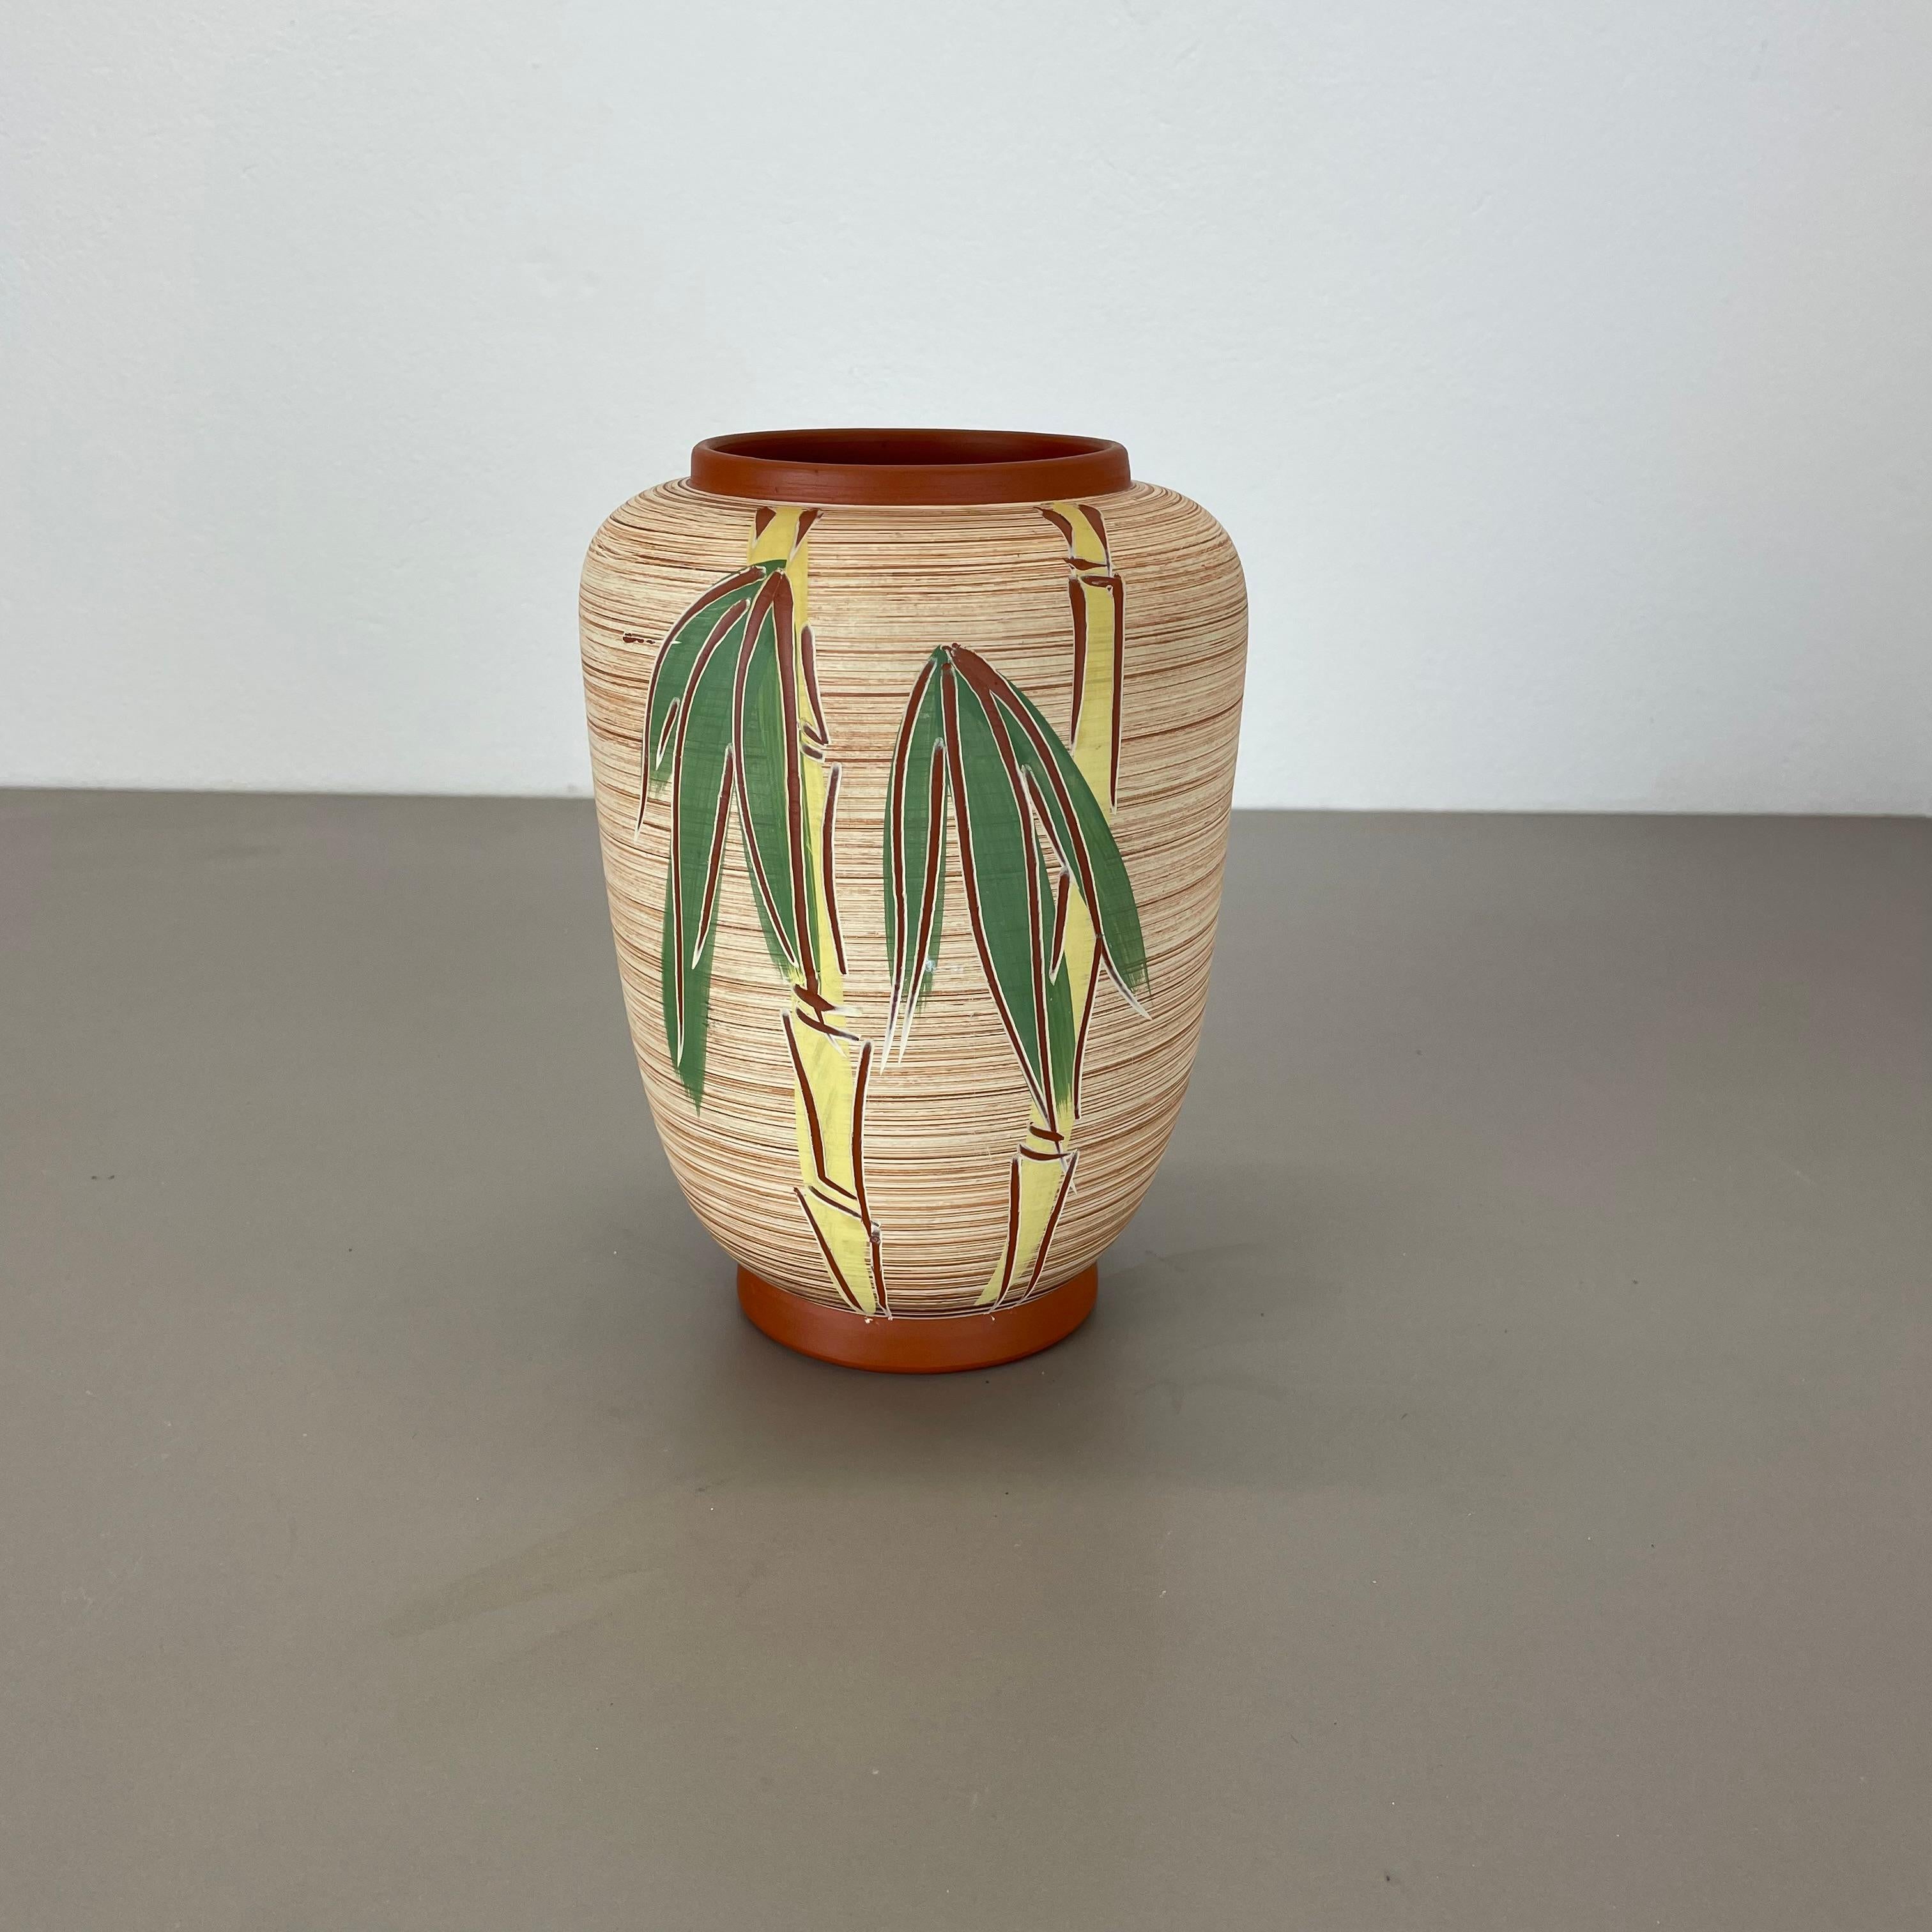 Article:

Pottery ceramic vase


Producer:

EIWA Ceramic, Germany



Decade:

1950s



Description:

Original vintage 1950s pottery ceramic vase made in Germany. High quality German production with a nice abstract BAMBOO painting. The vase was